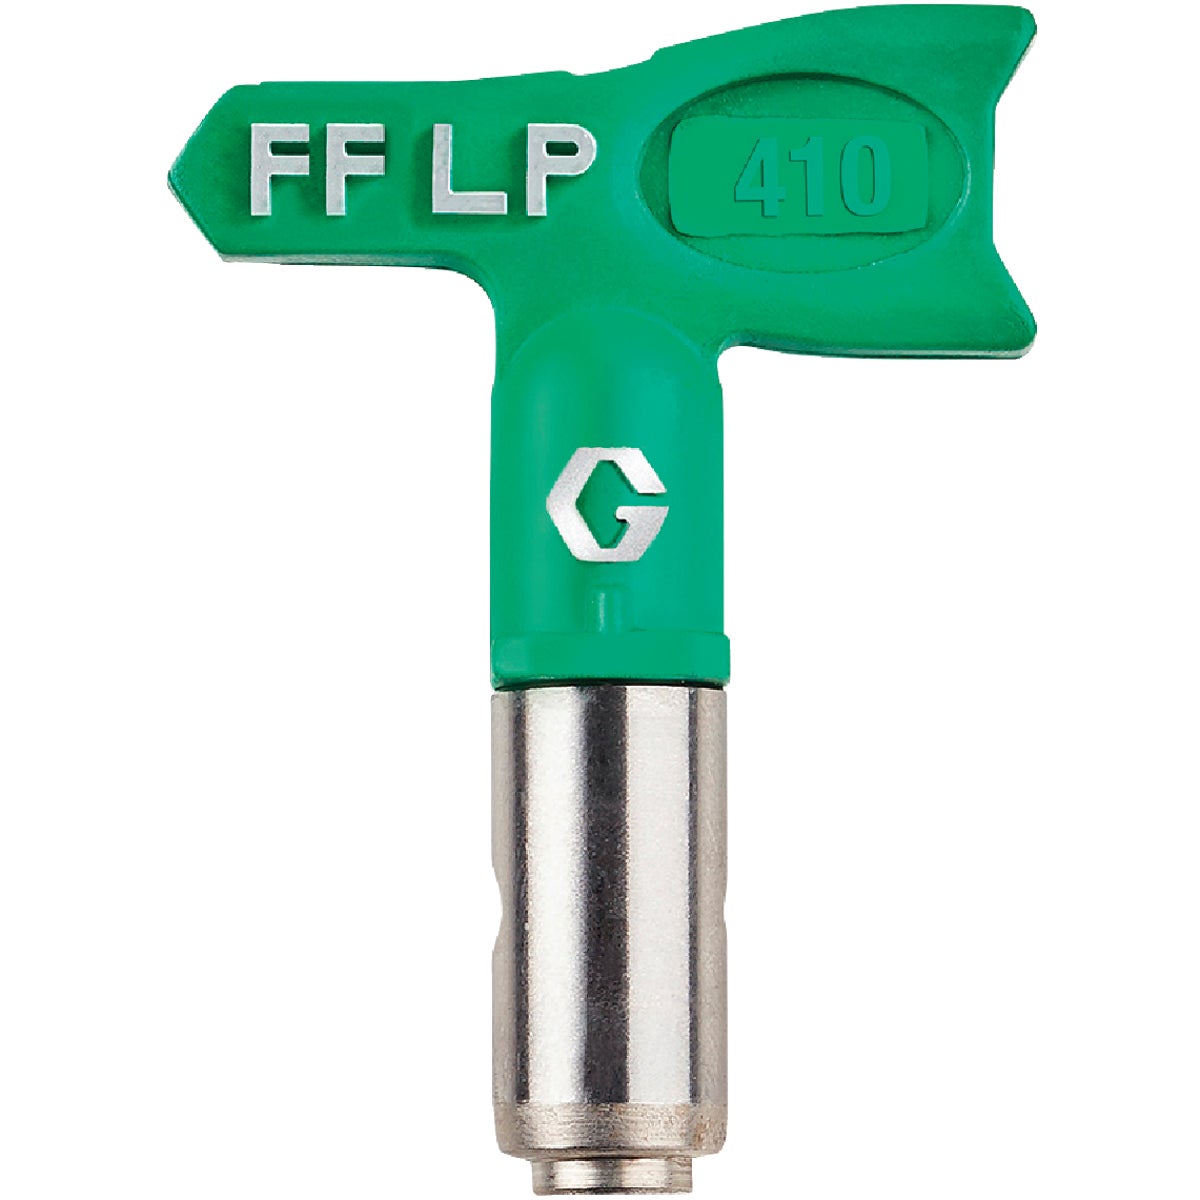 Graco Fine Finish Low Pressure SwitchTip Airless Spray Tip FFLP410-1 Each for sale online